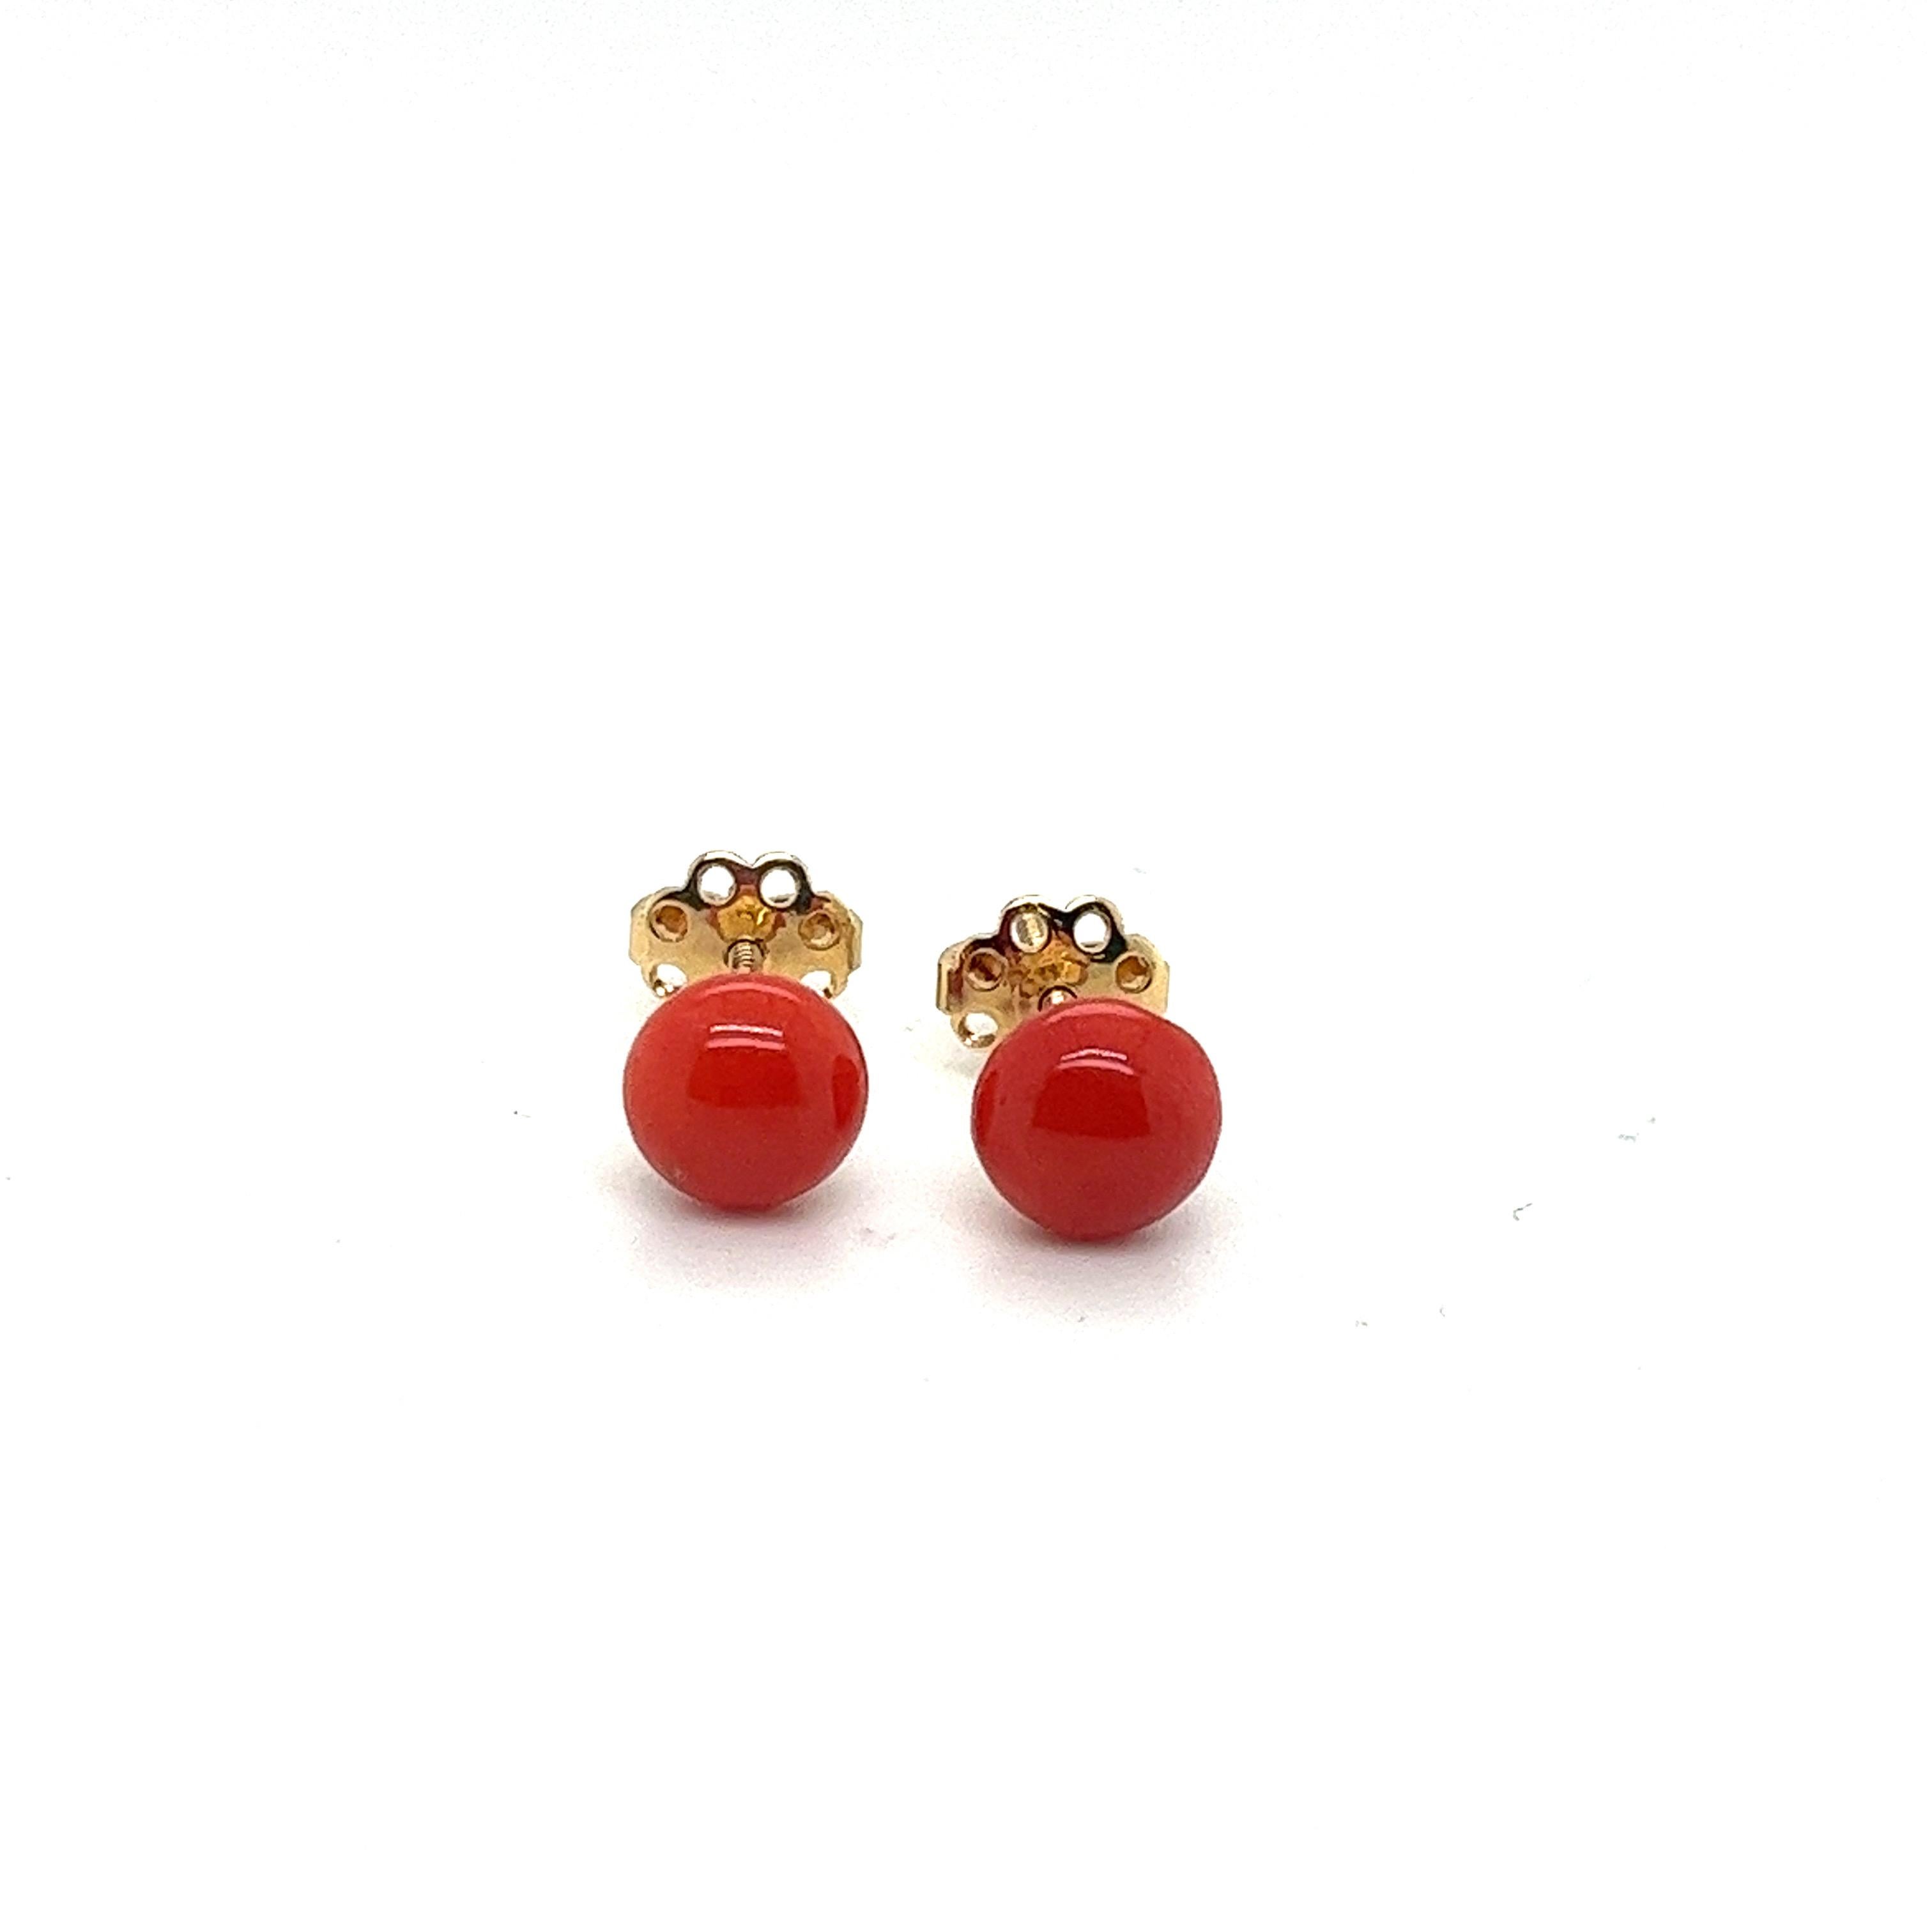 Vintage 1970's Italian Coral Earrings - 7.50mm Diameter - 18K Yellow Gold Screw Backs

Introducing a stunning pair of vintage Italian coral earrings from the glamorous 1970s. These exquisite earrings showcase the timeless allure of coral, a coveted